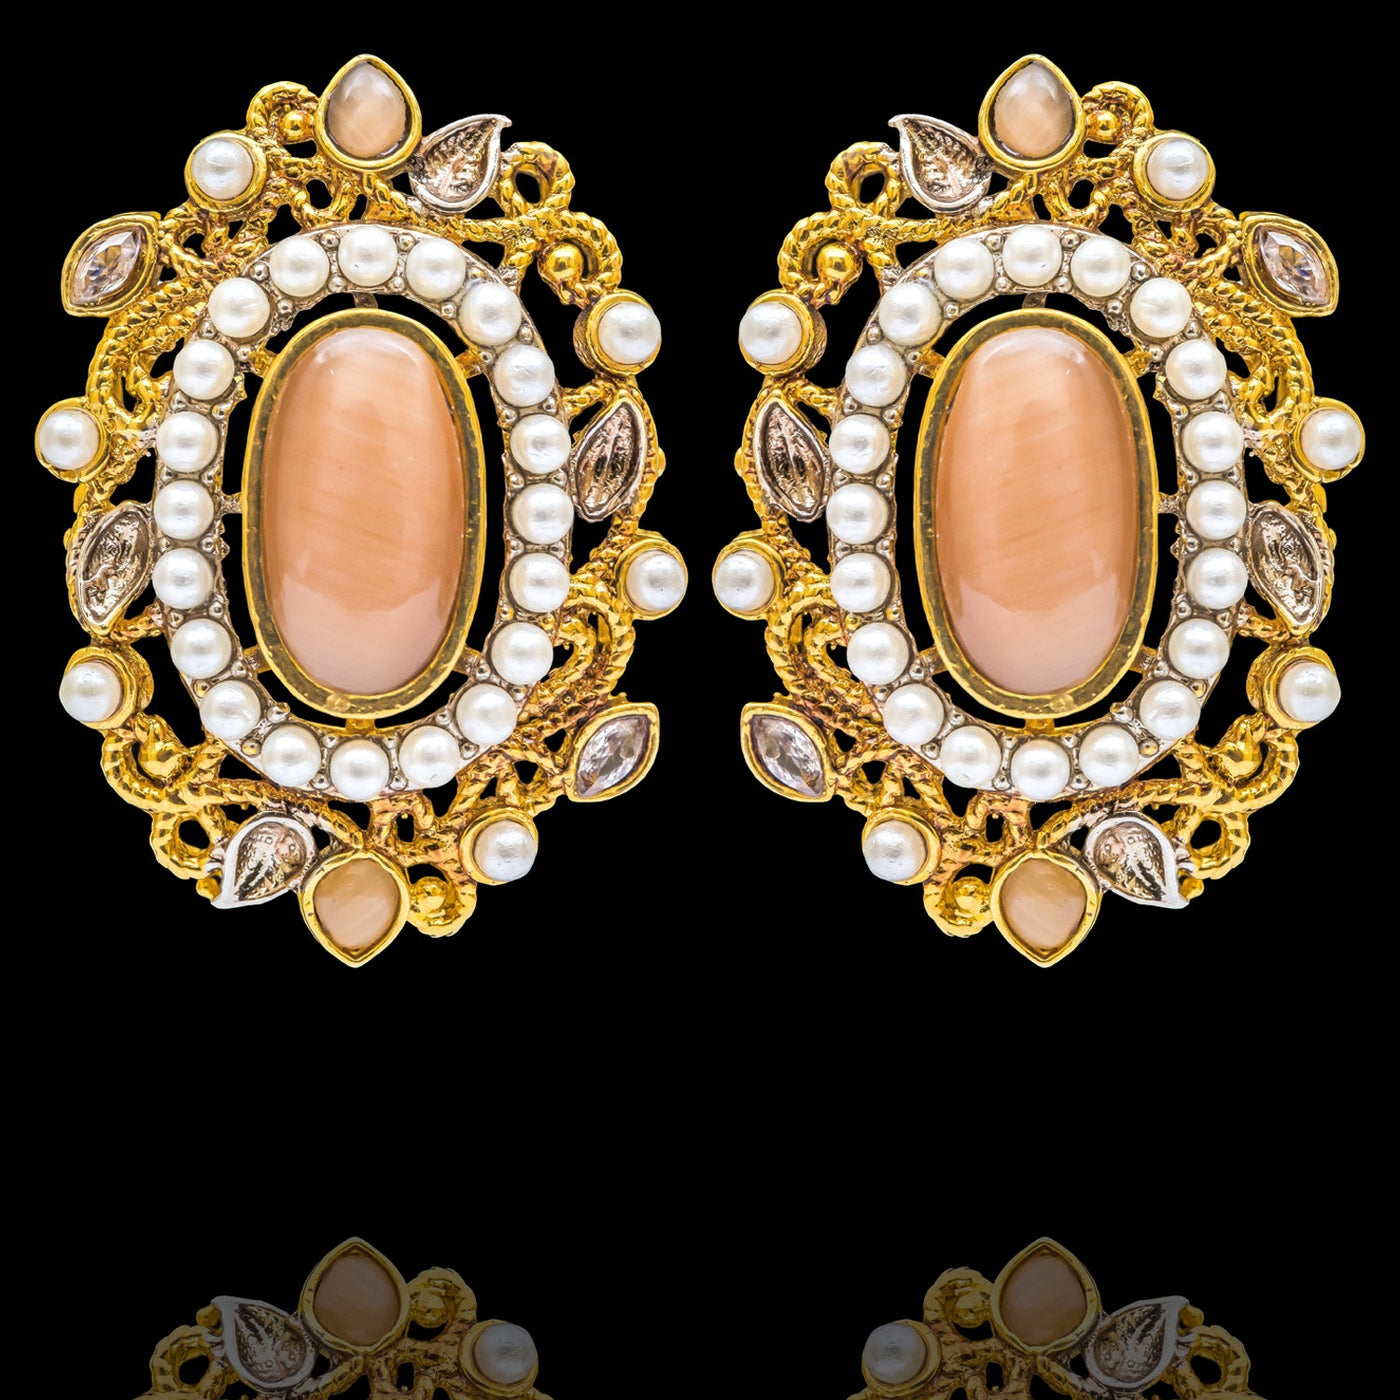 Olivia Earrings - Available in 3 Colors